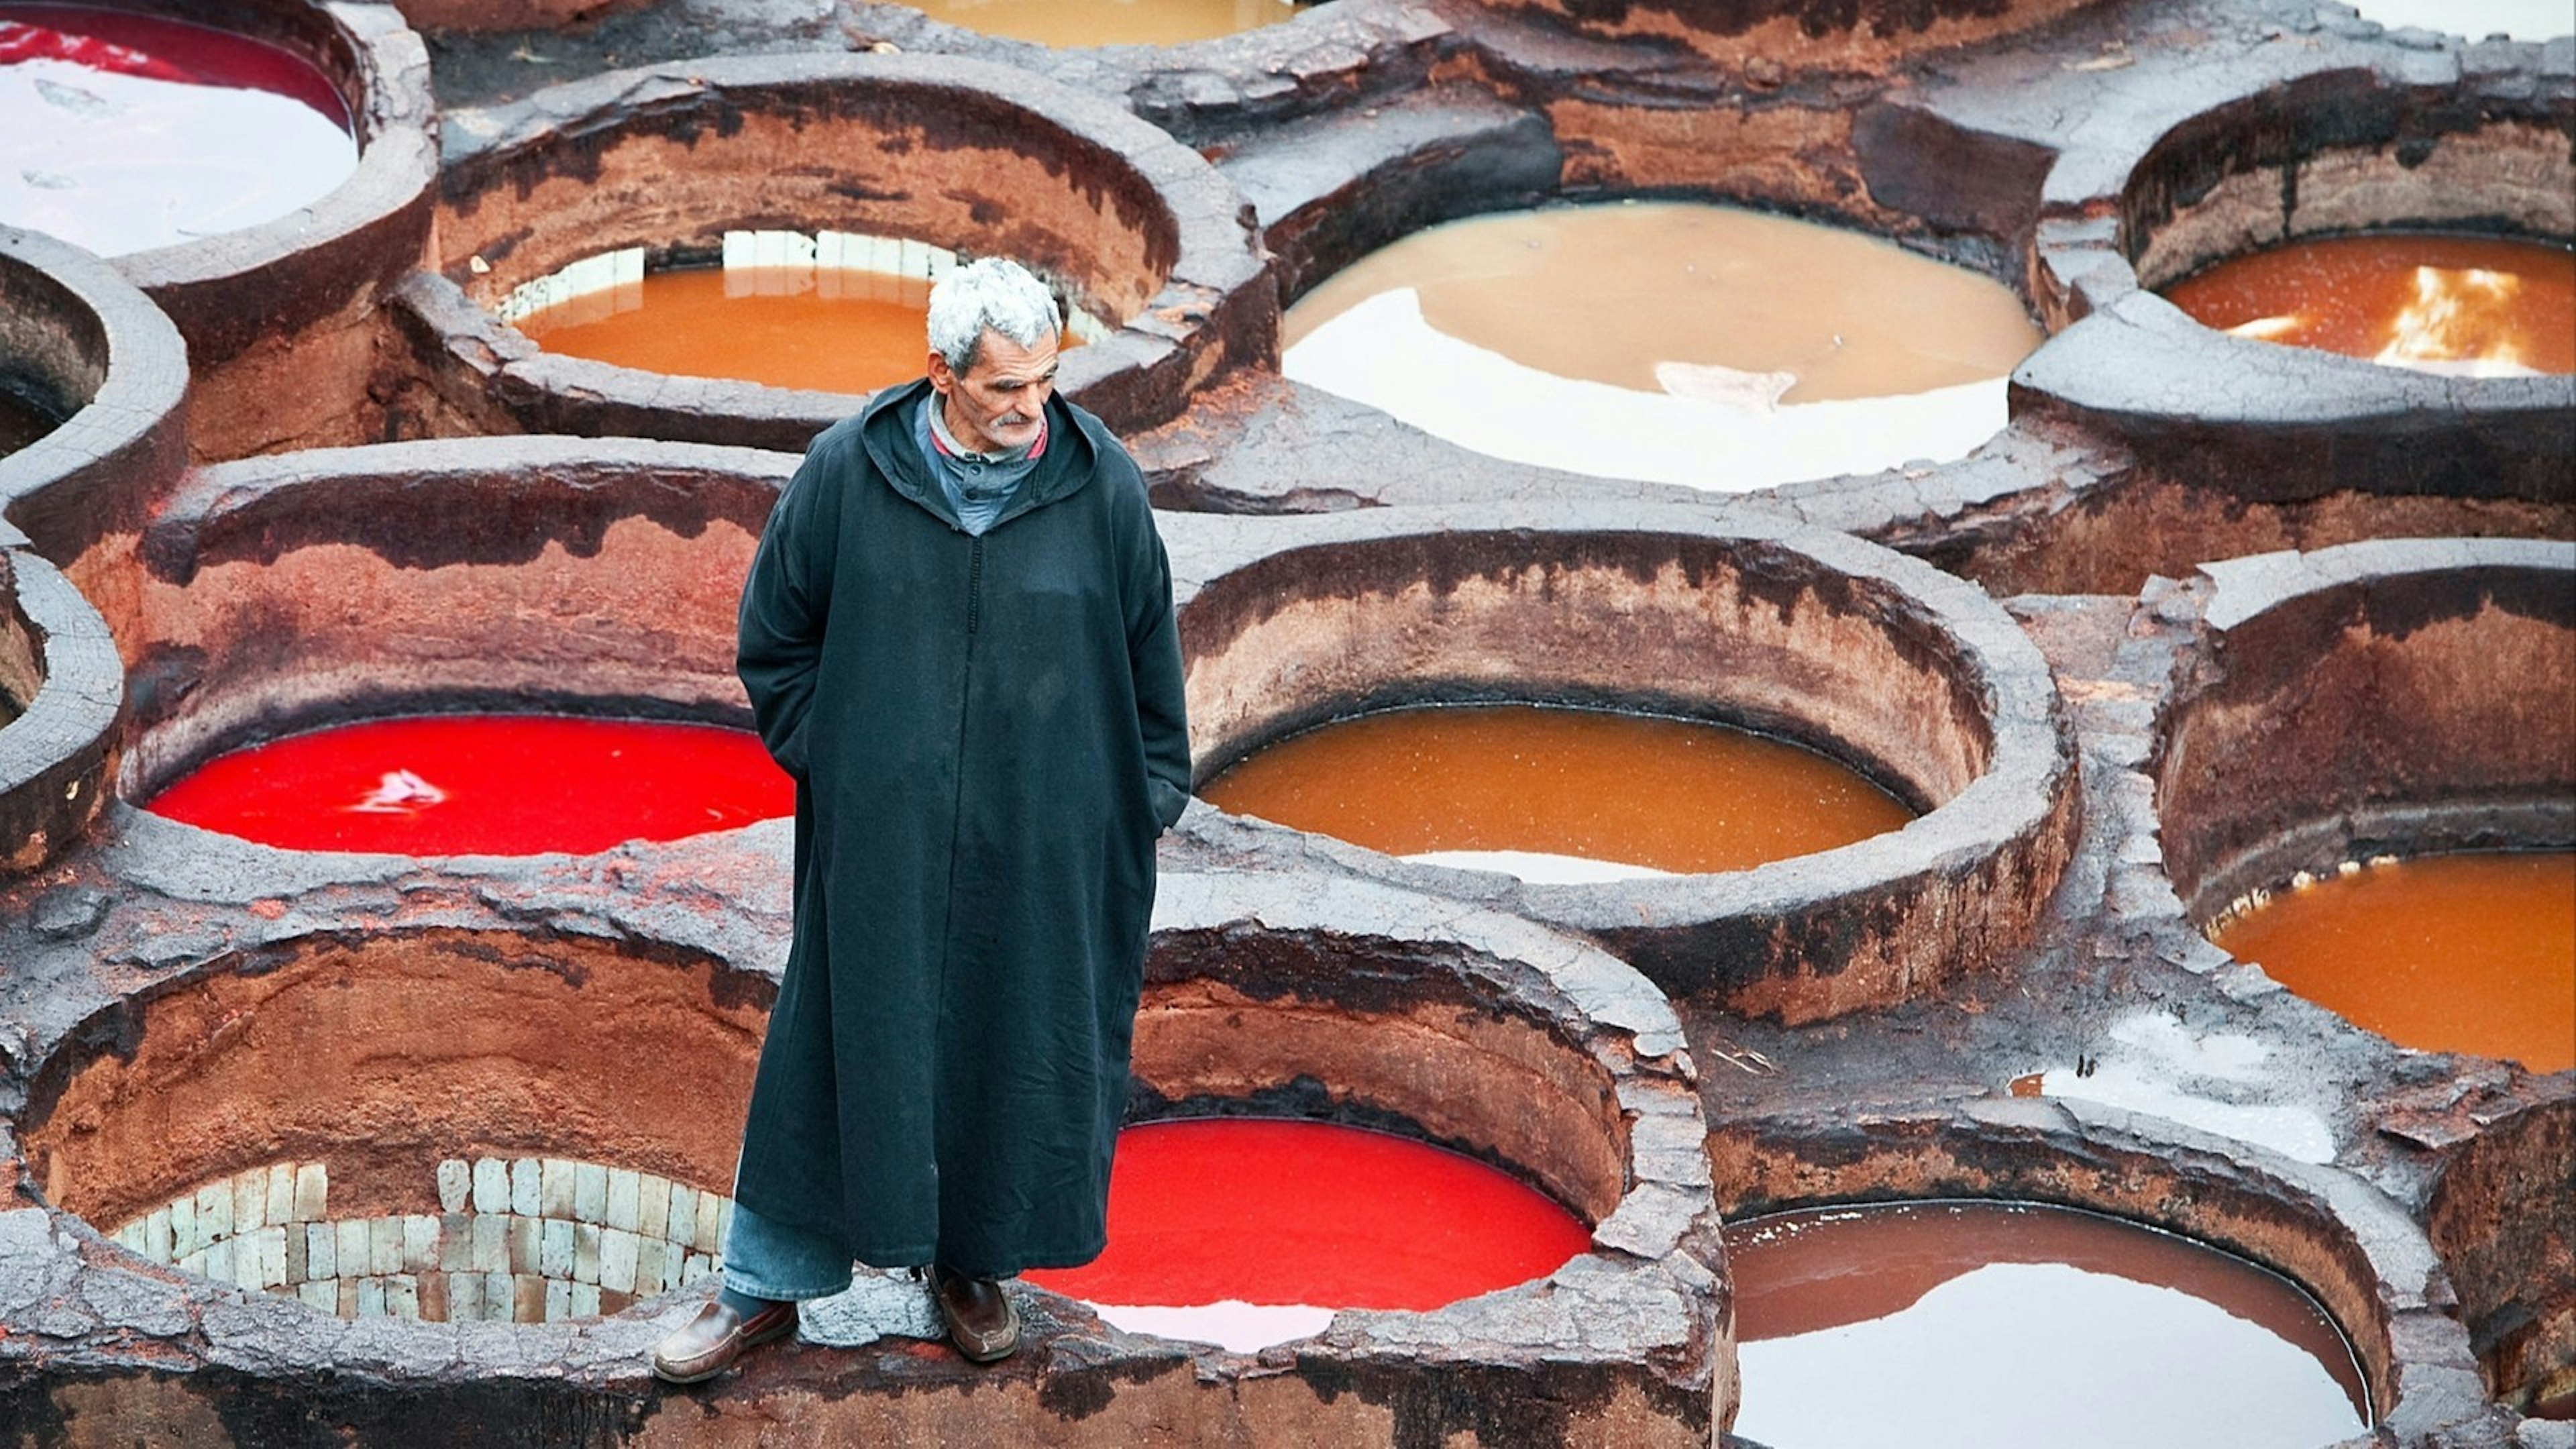 Tanning production is one of the most ancient in Morocco